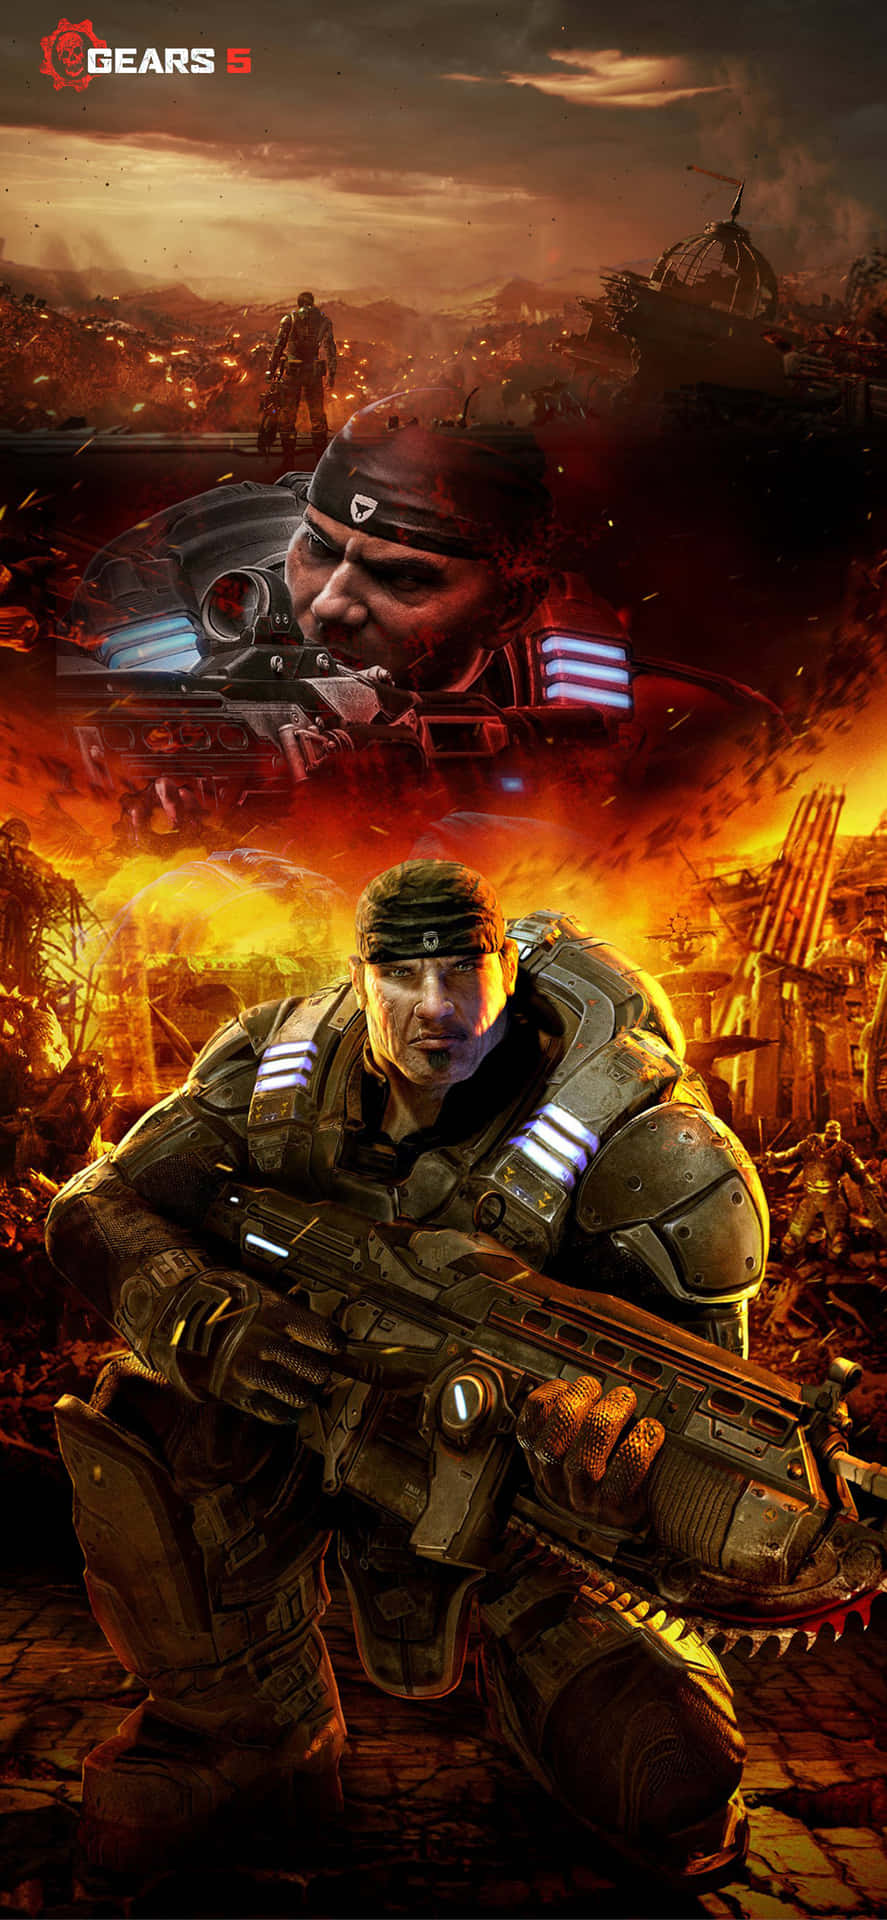 Caption: Energetic Gears of War 5 Game Wallpaper for iPhone XS Max